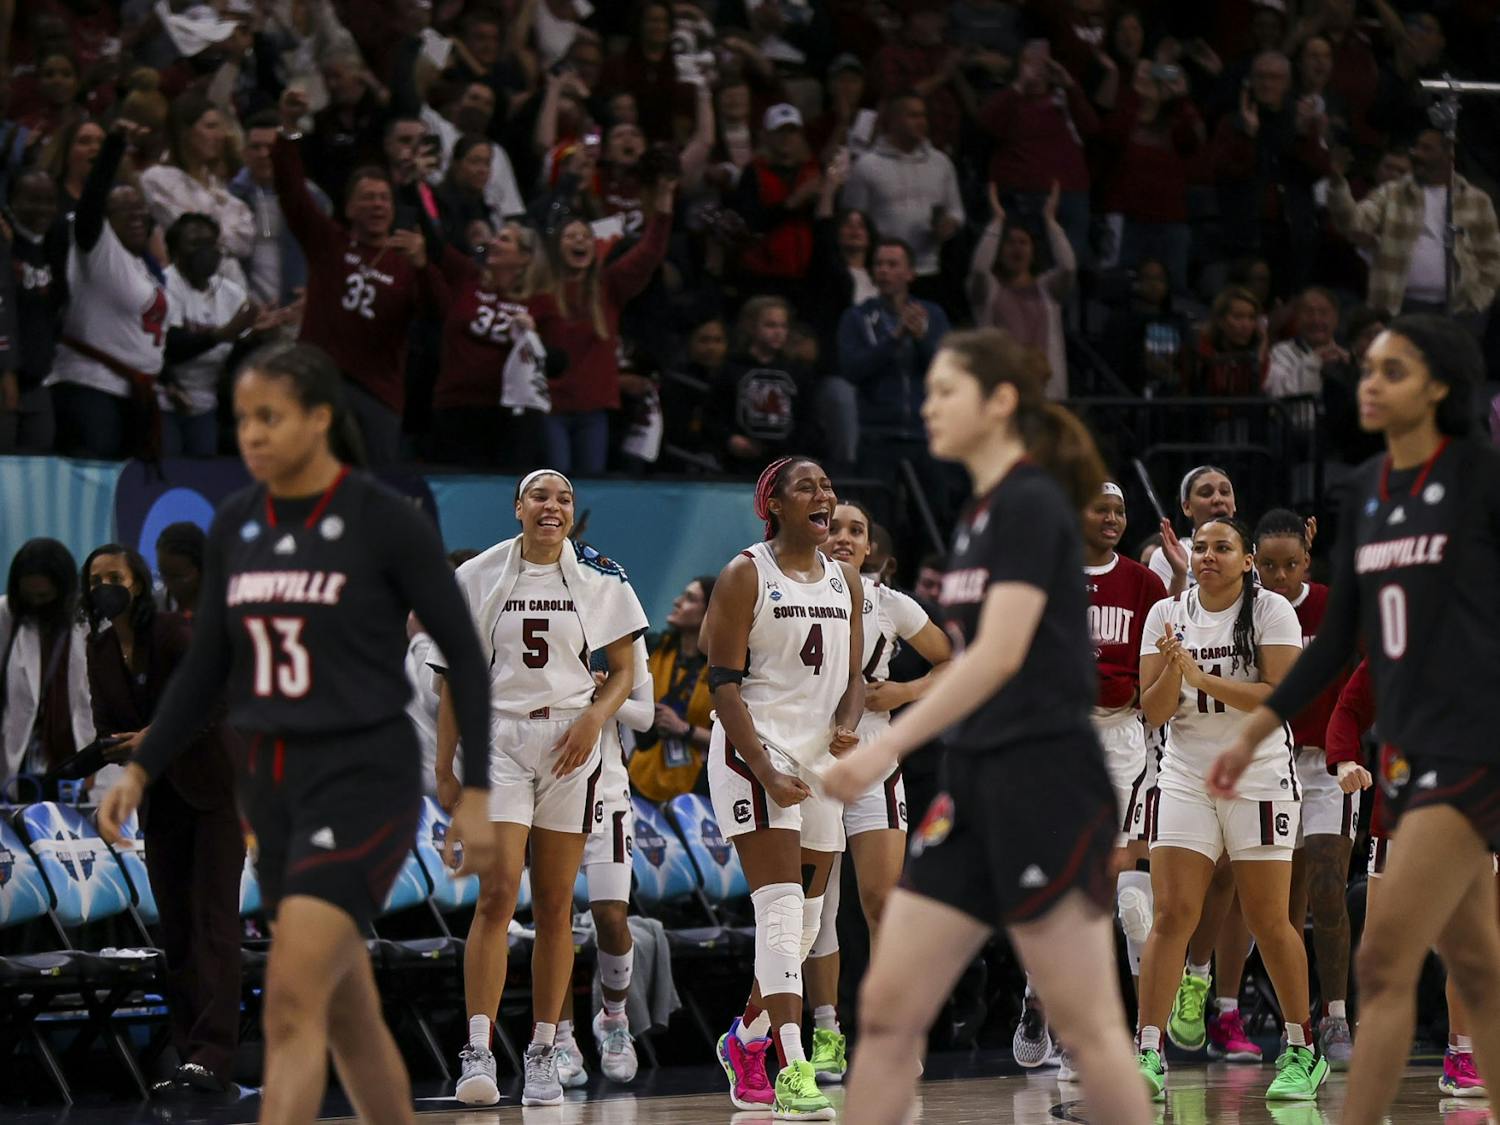 With a 72-59 victory over No. 1 Louisville on Friday April, 1, South Carolina has officially advanced to the NCAA National Championship game on Sunday, April 3.&nbsp;